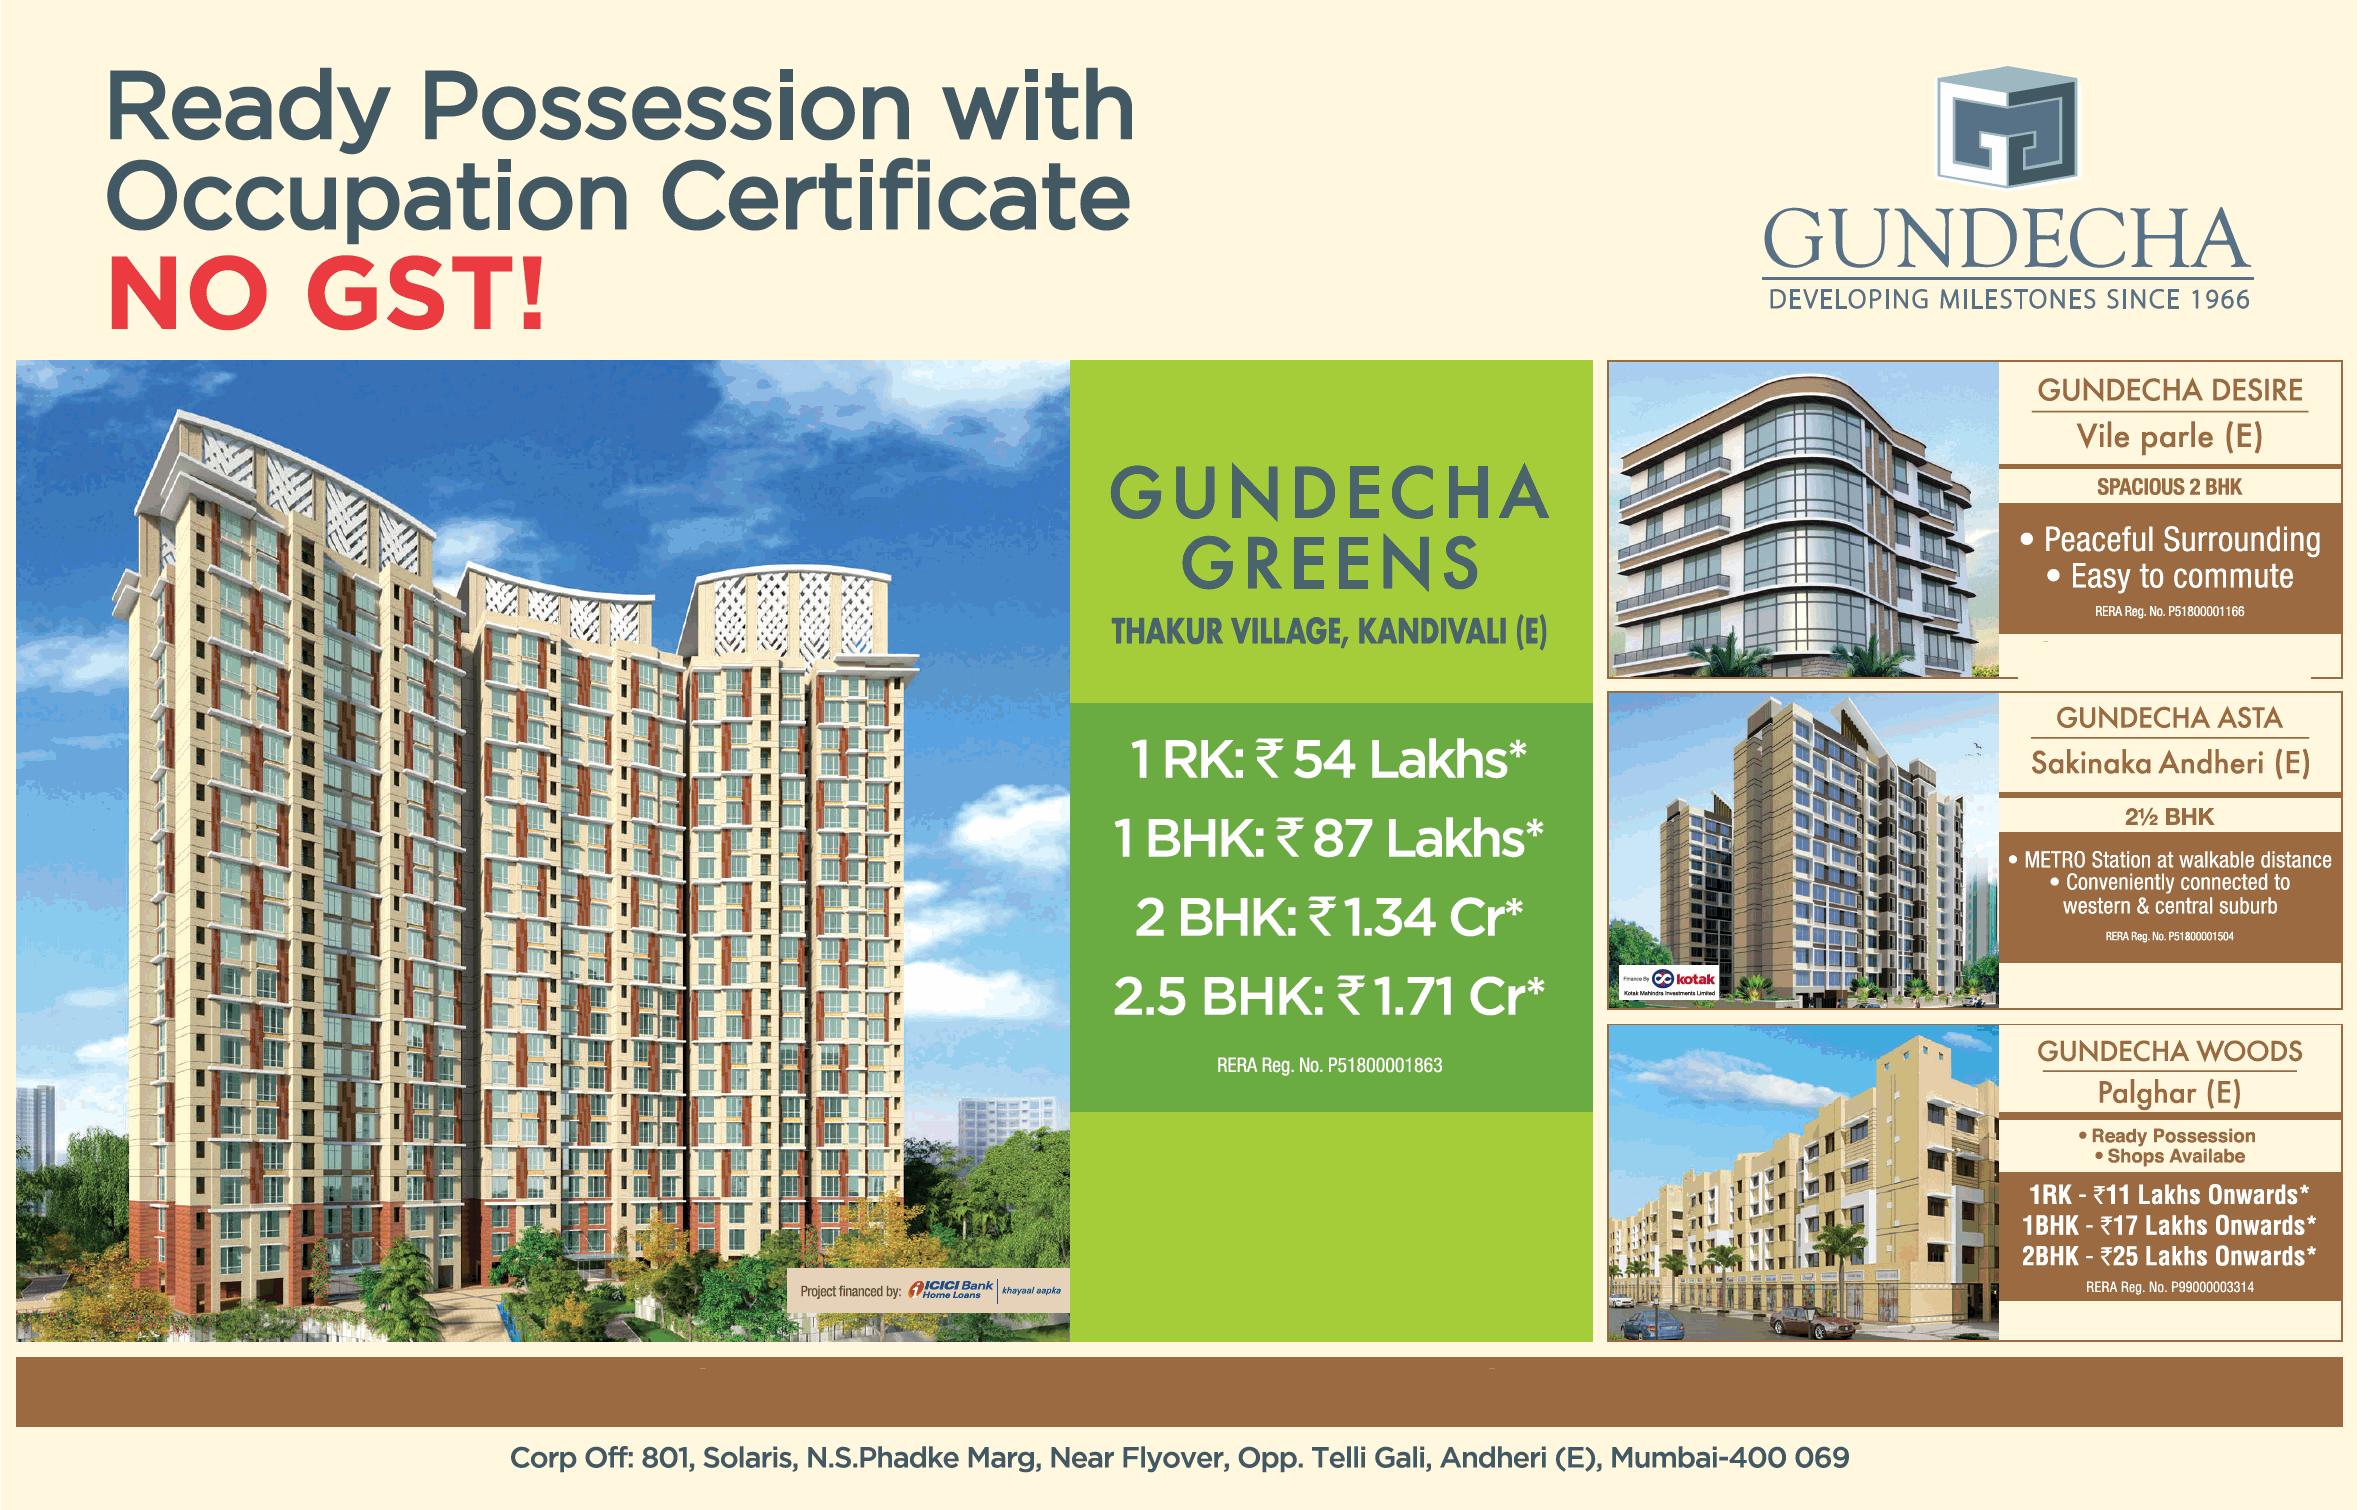 Ready possession with occupation certificate no GST at Gundecha Greens, Mumbai Update